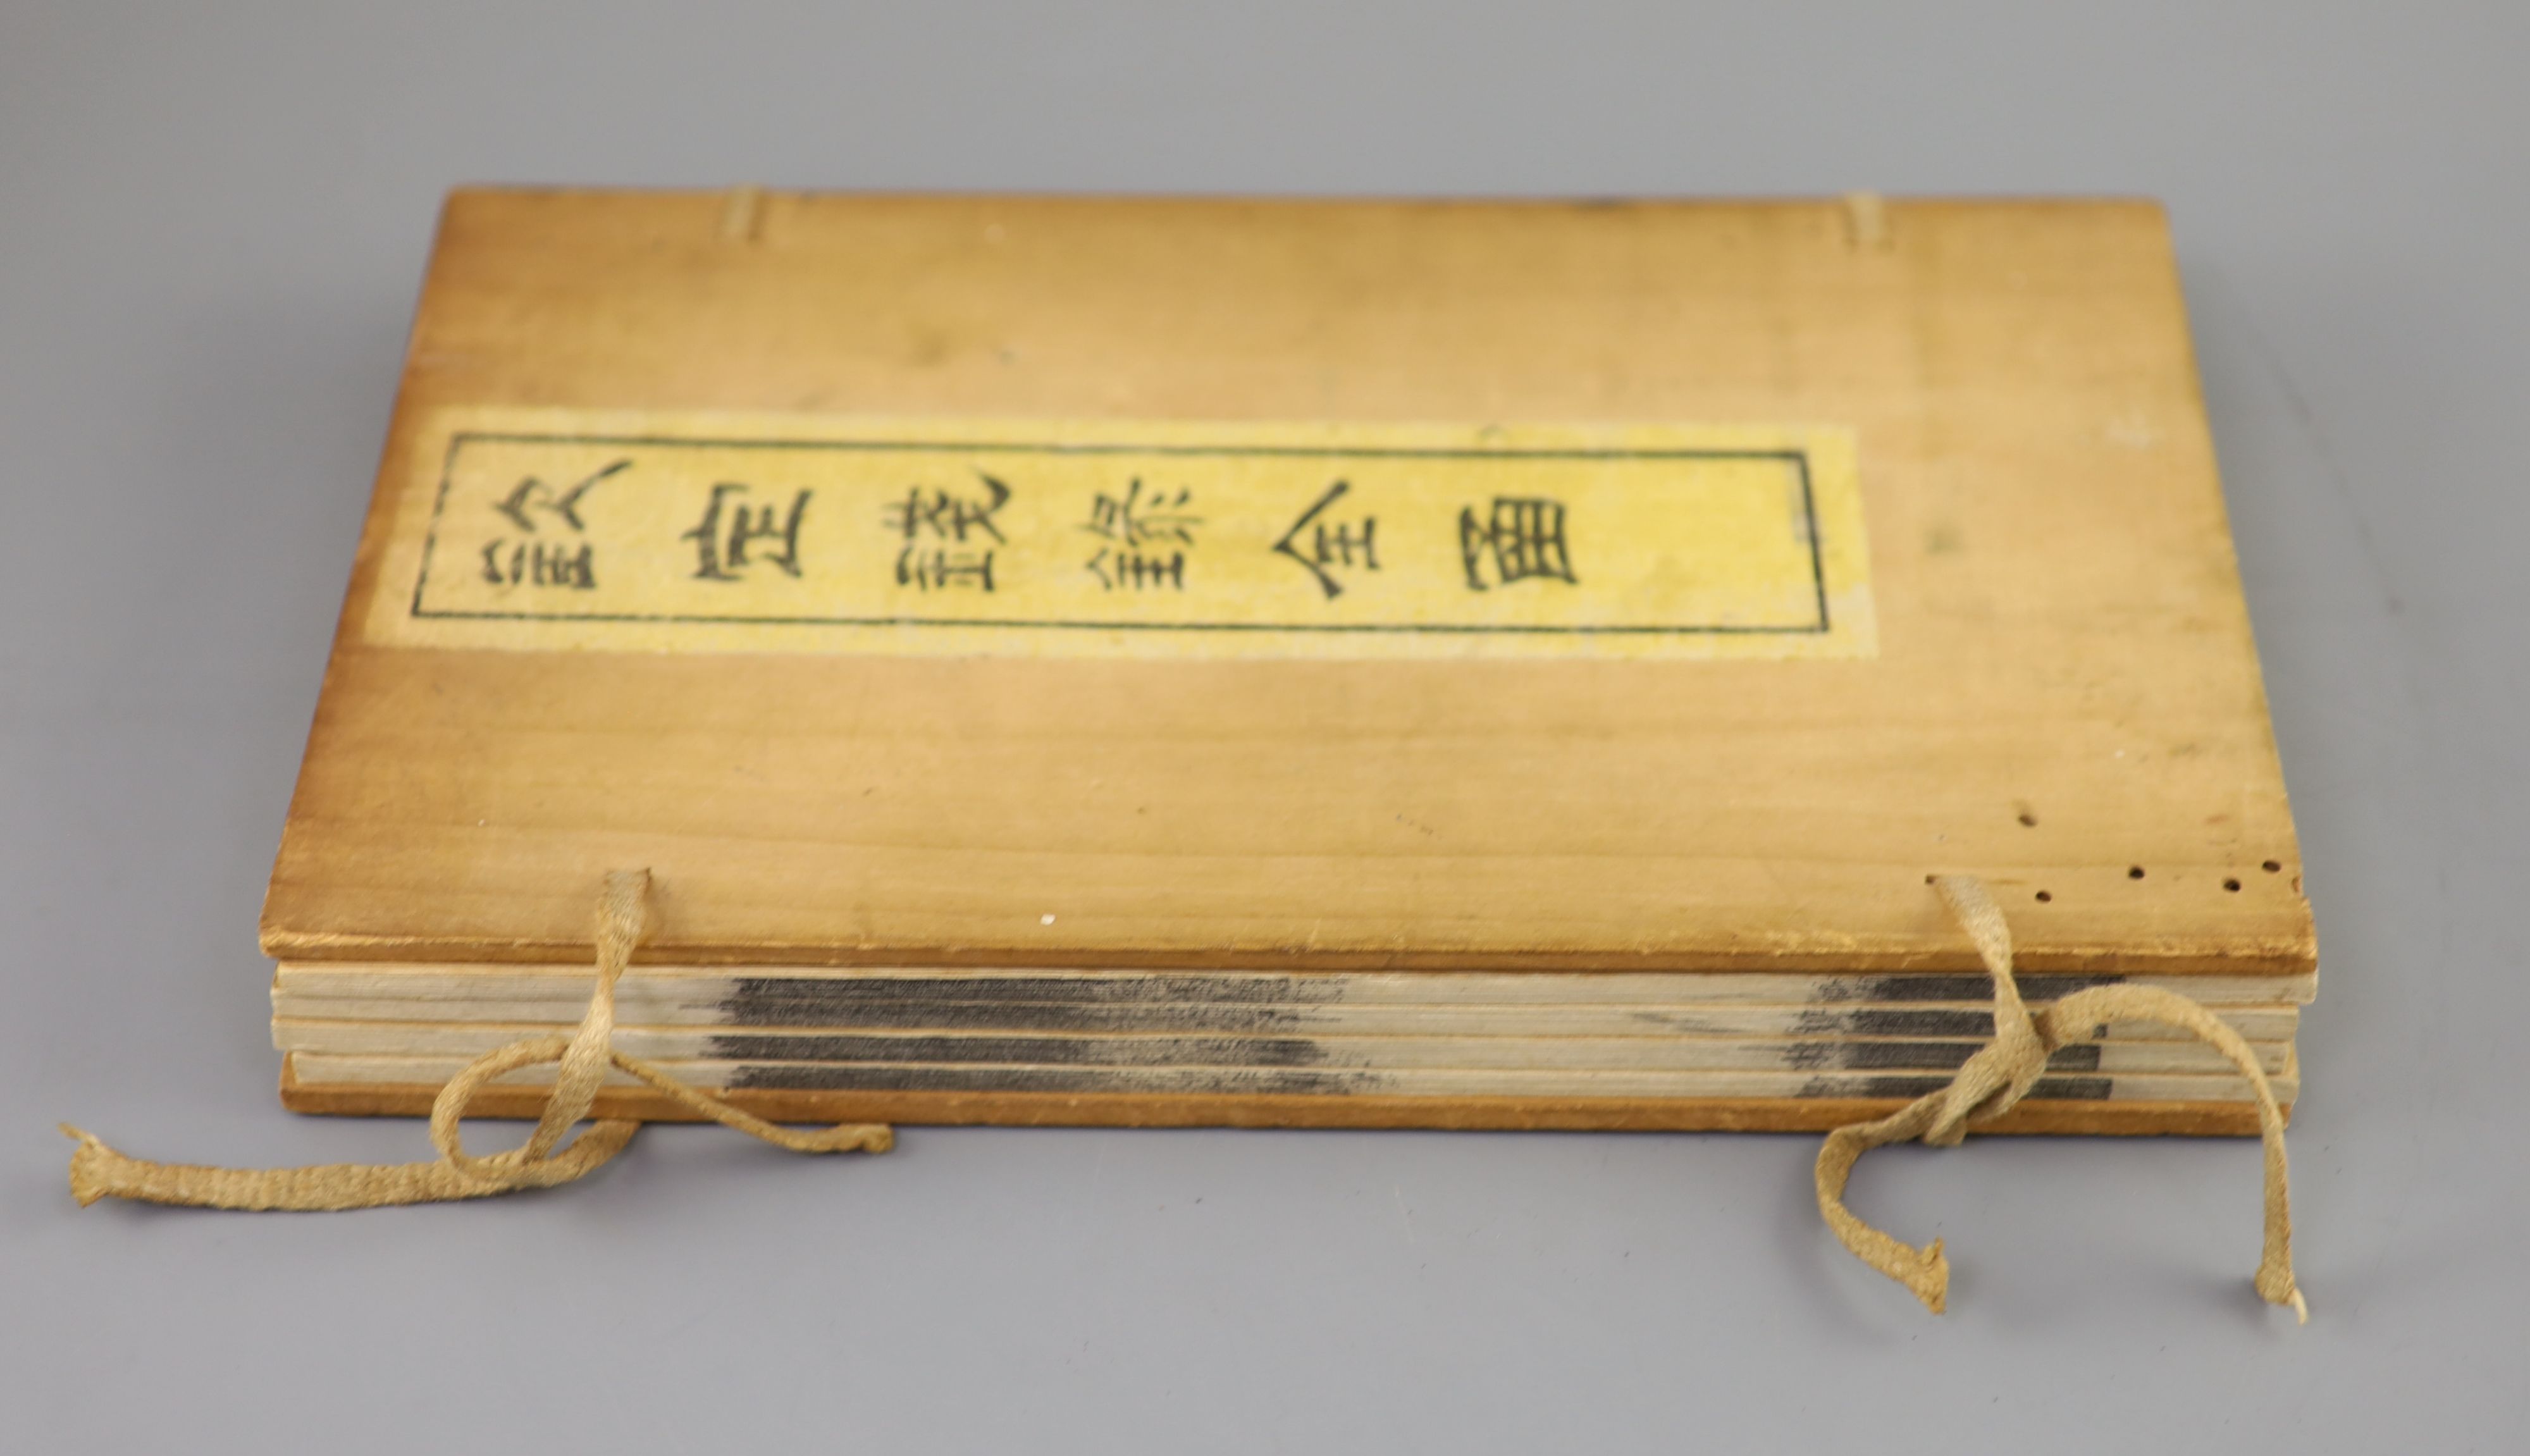 Liang Shizheng, Qin ding qian lu, Record of Chinese Coins published under Imperial Instructions, Provenance - A. T. Arber-Cooke